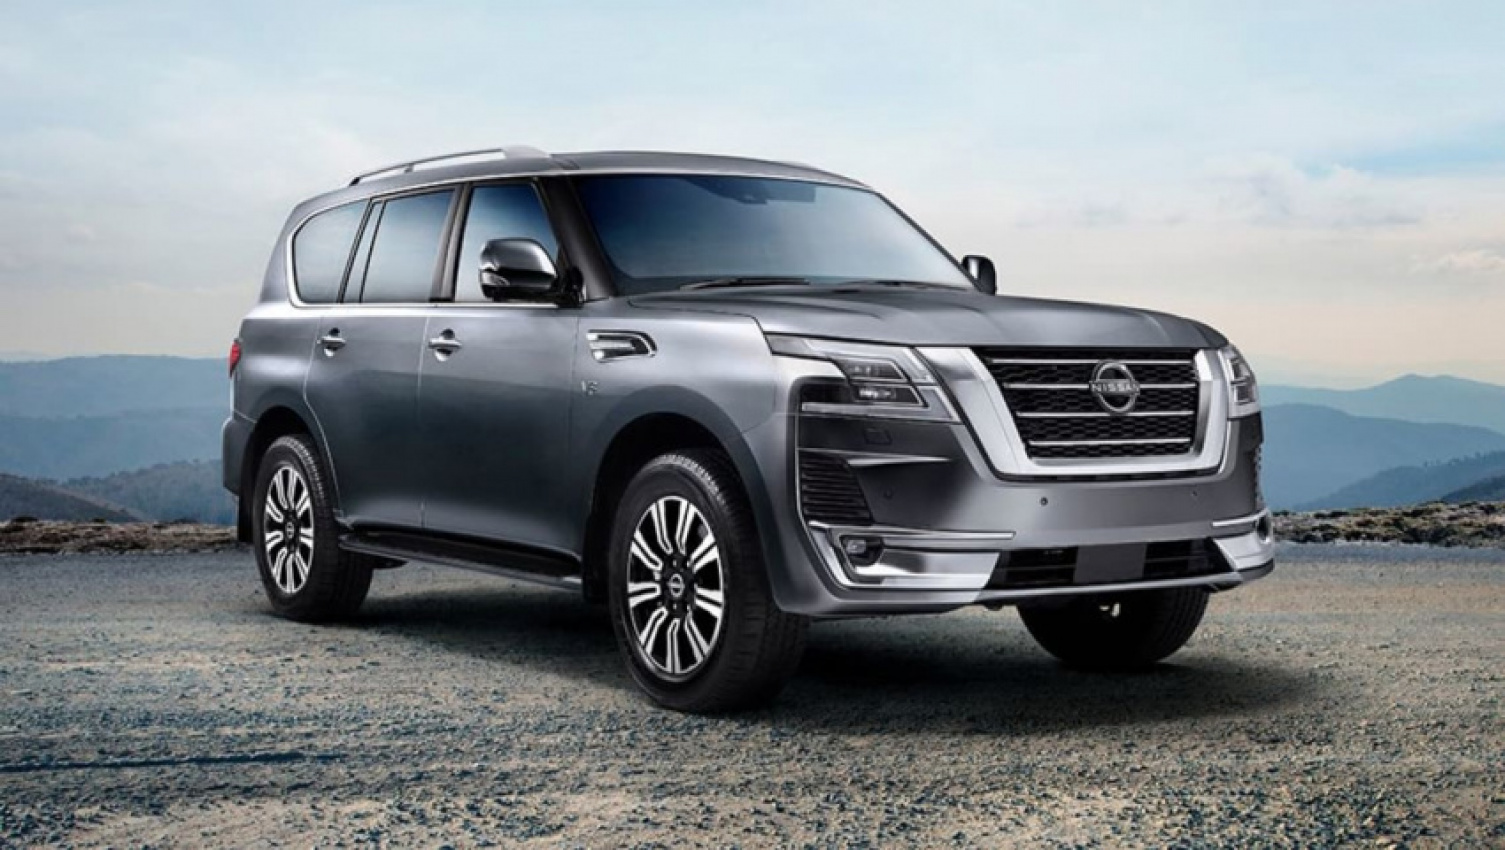 autos, cars, nissan, toyota, industry news, nissan news, nissan patrol, nissan patrol 2022, nissan suv range, showroom news, toyota land cruiser, toyota landcruiser 2022, toyota news, toyota suv range, 2022 nissan patrol beats toyota landcruiser! nissan's v8-powered y62 off-roader overtakes lc300 and lc76 wagons in tight february 2022 sales race